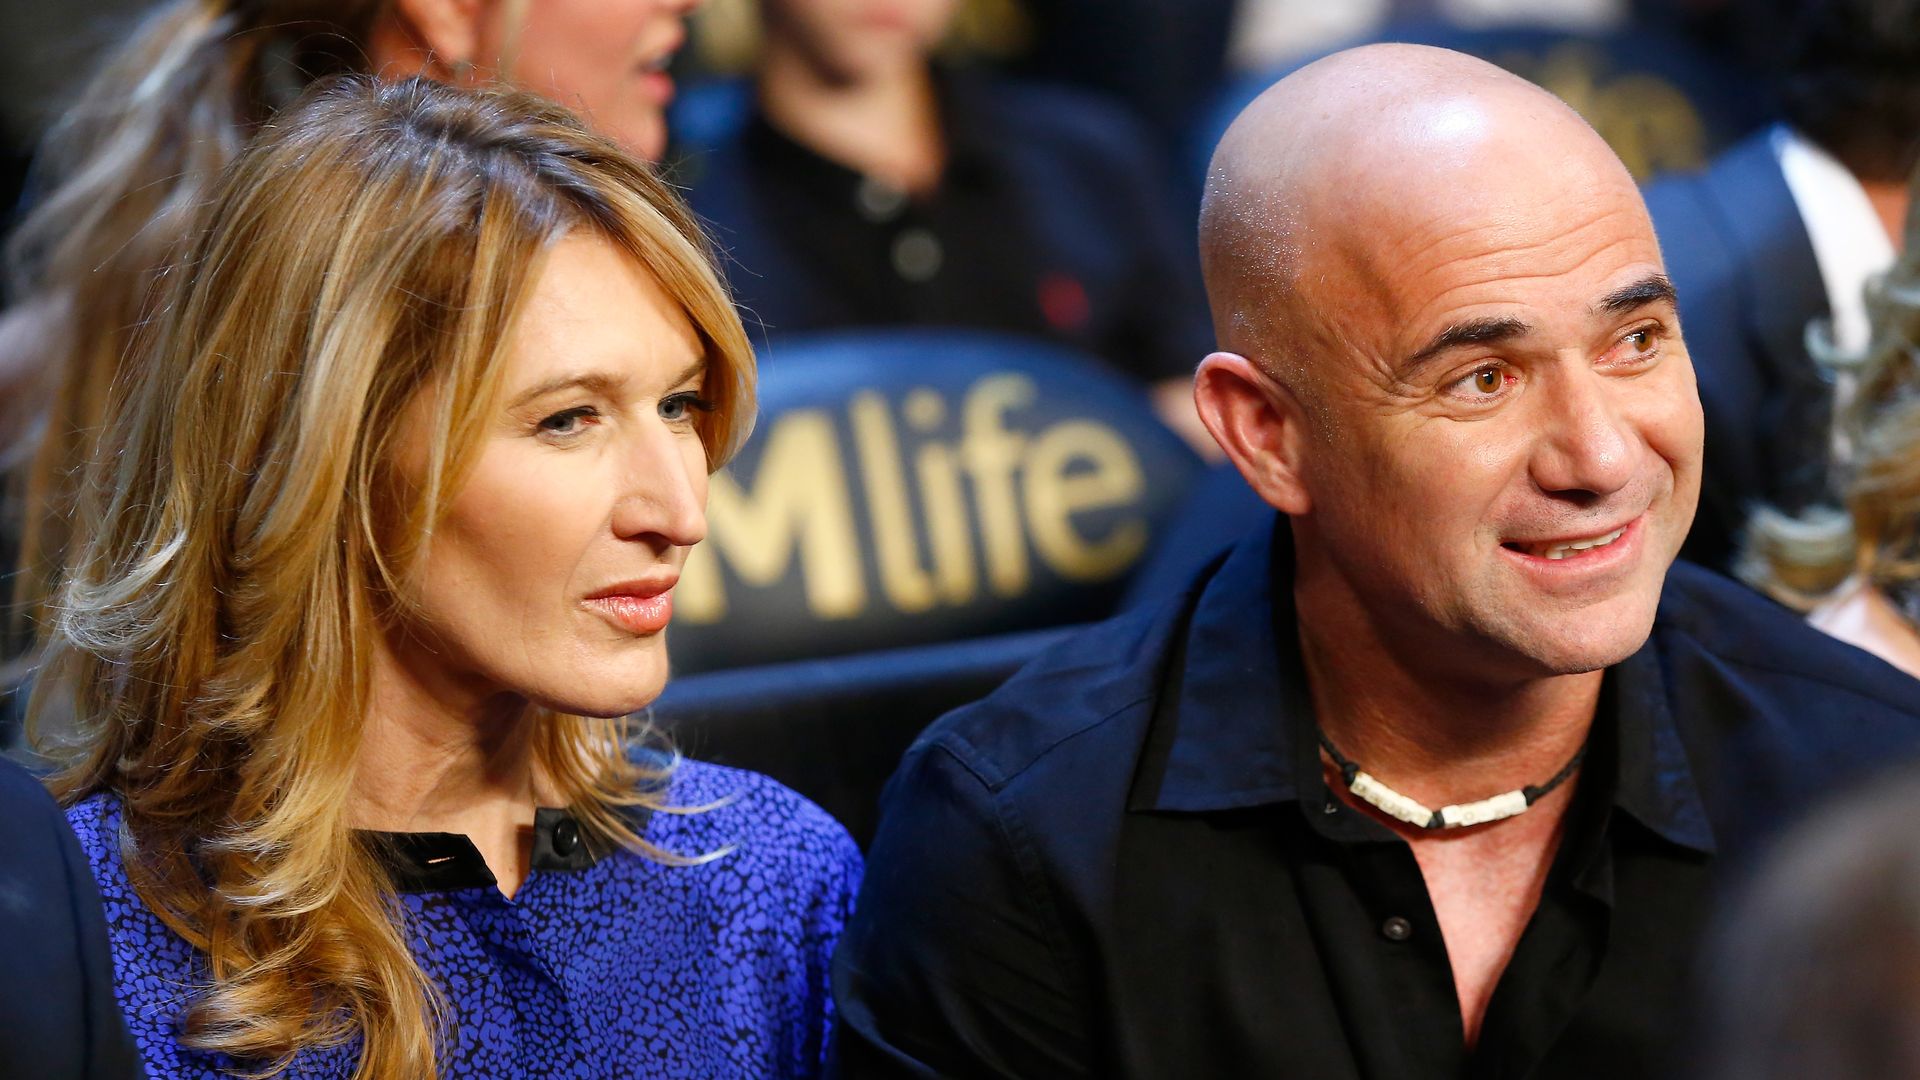 Andre Agassi shares tribute showing off Steffi Graf's Olympic triumph